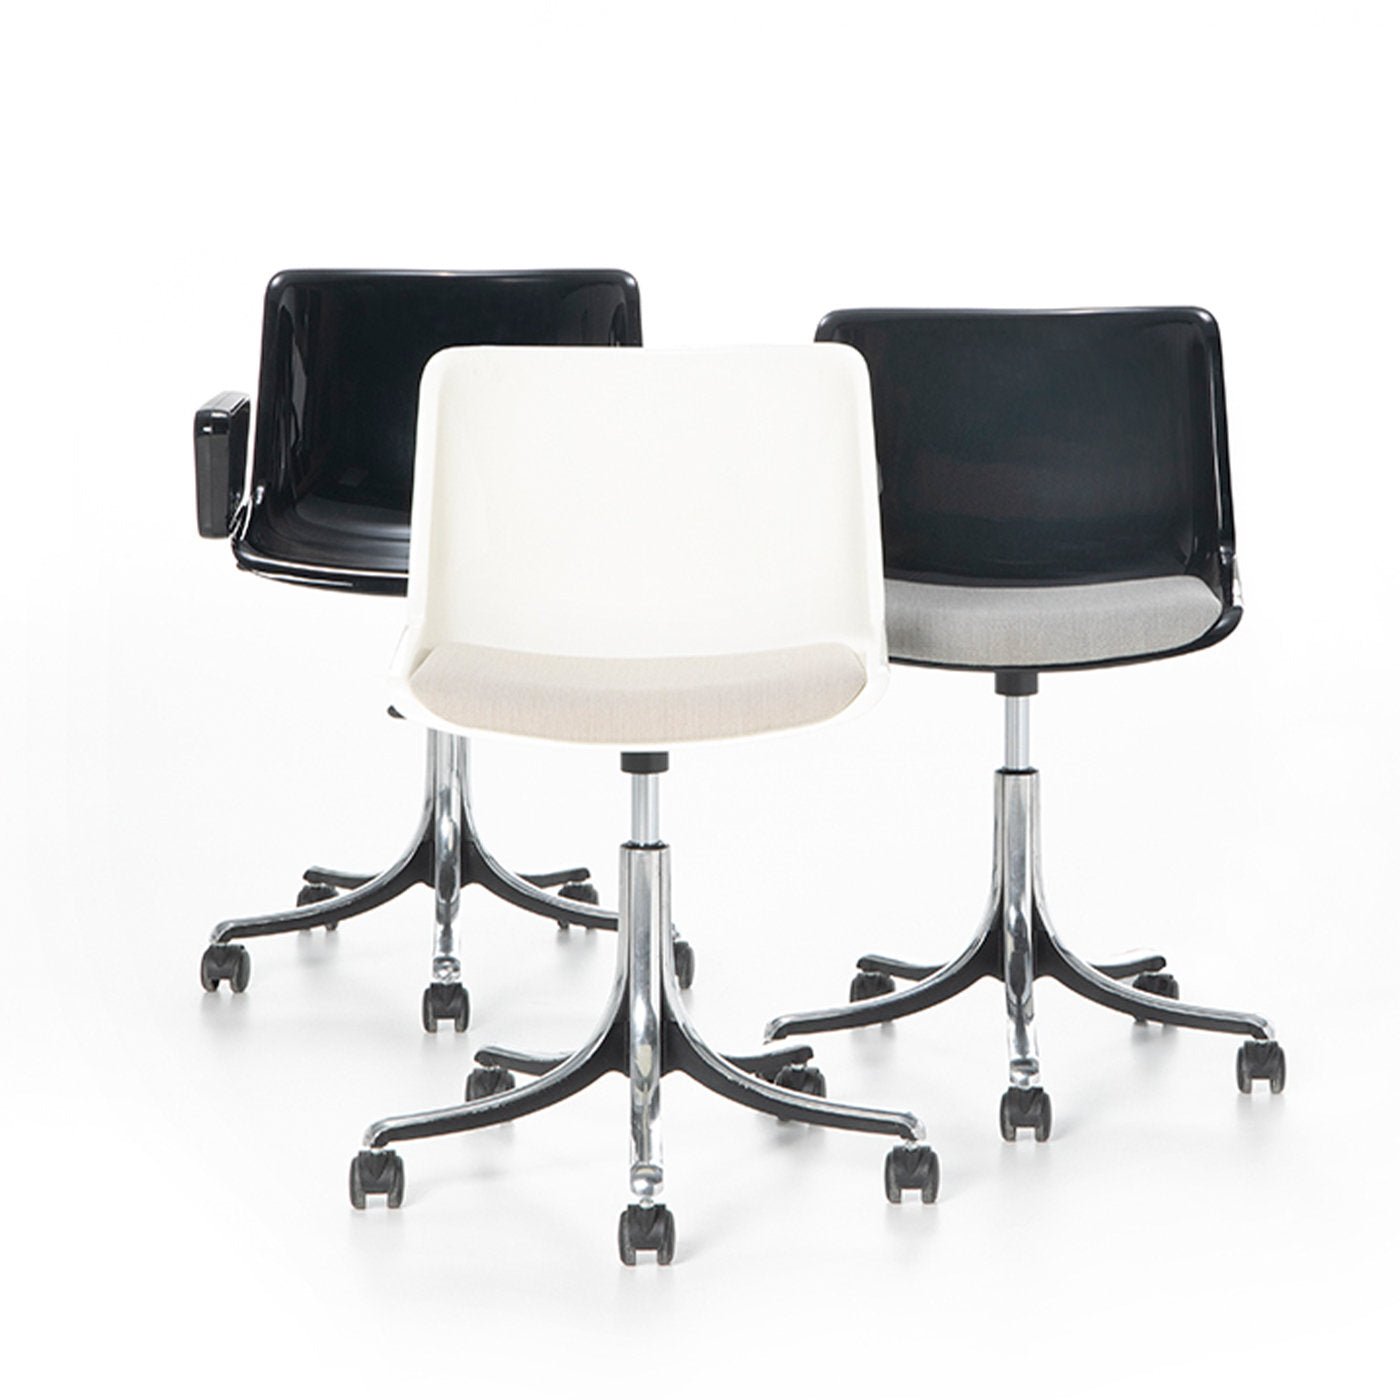 Modus Black Caster Chair with Gray Seat Cushion by Centro Progetti Tecno - Alternative view 1